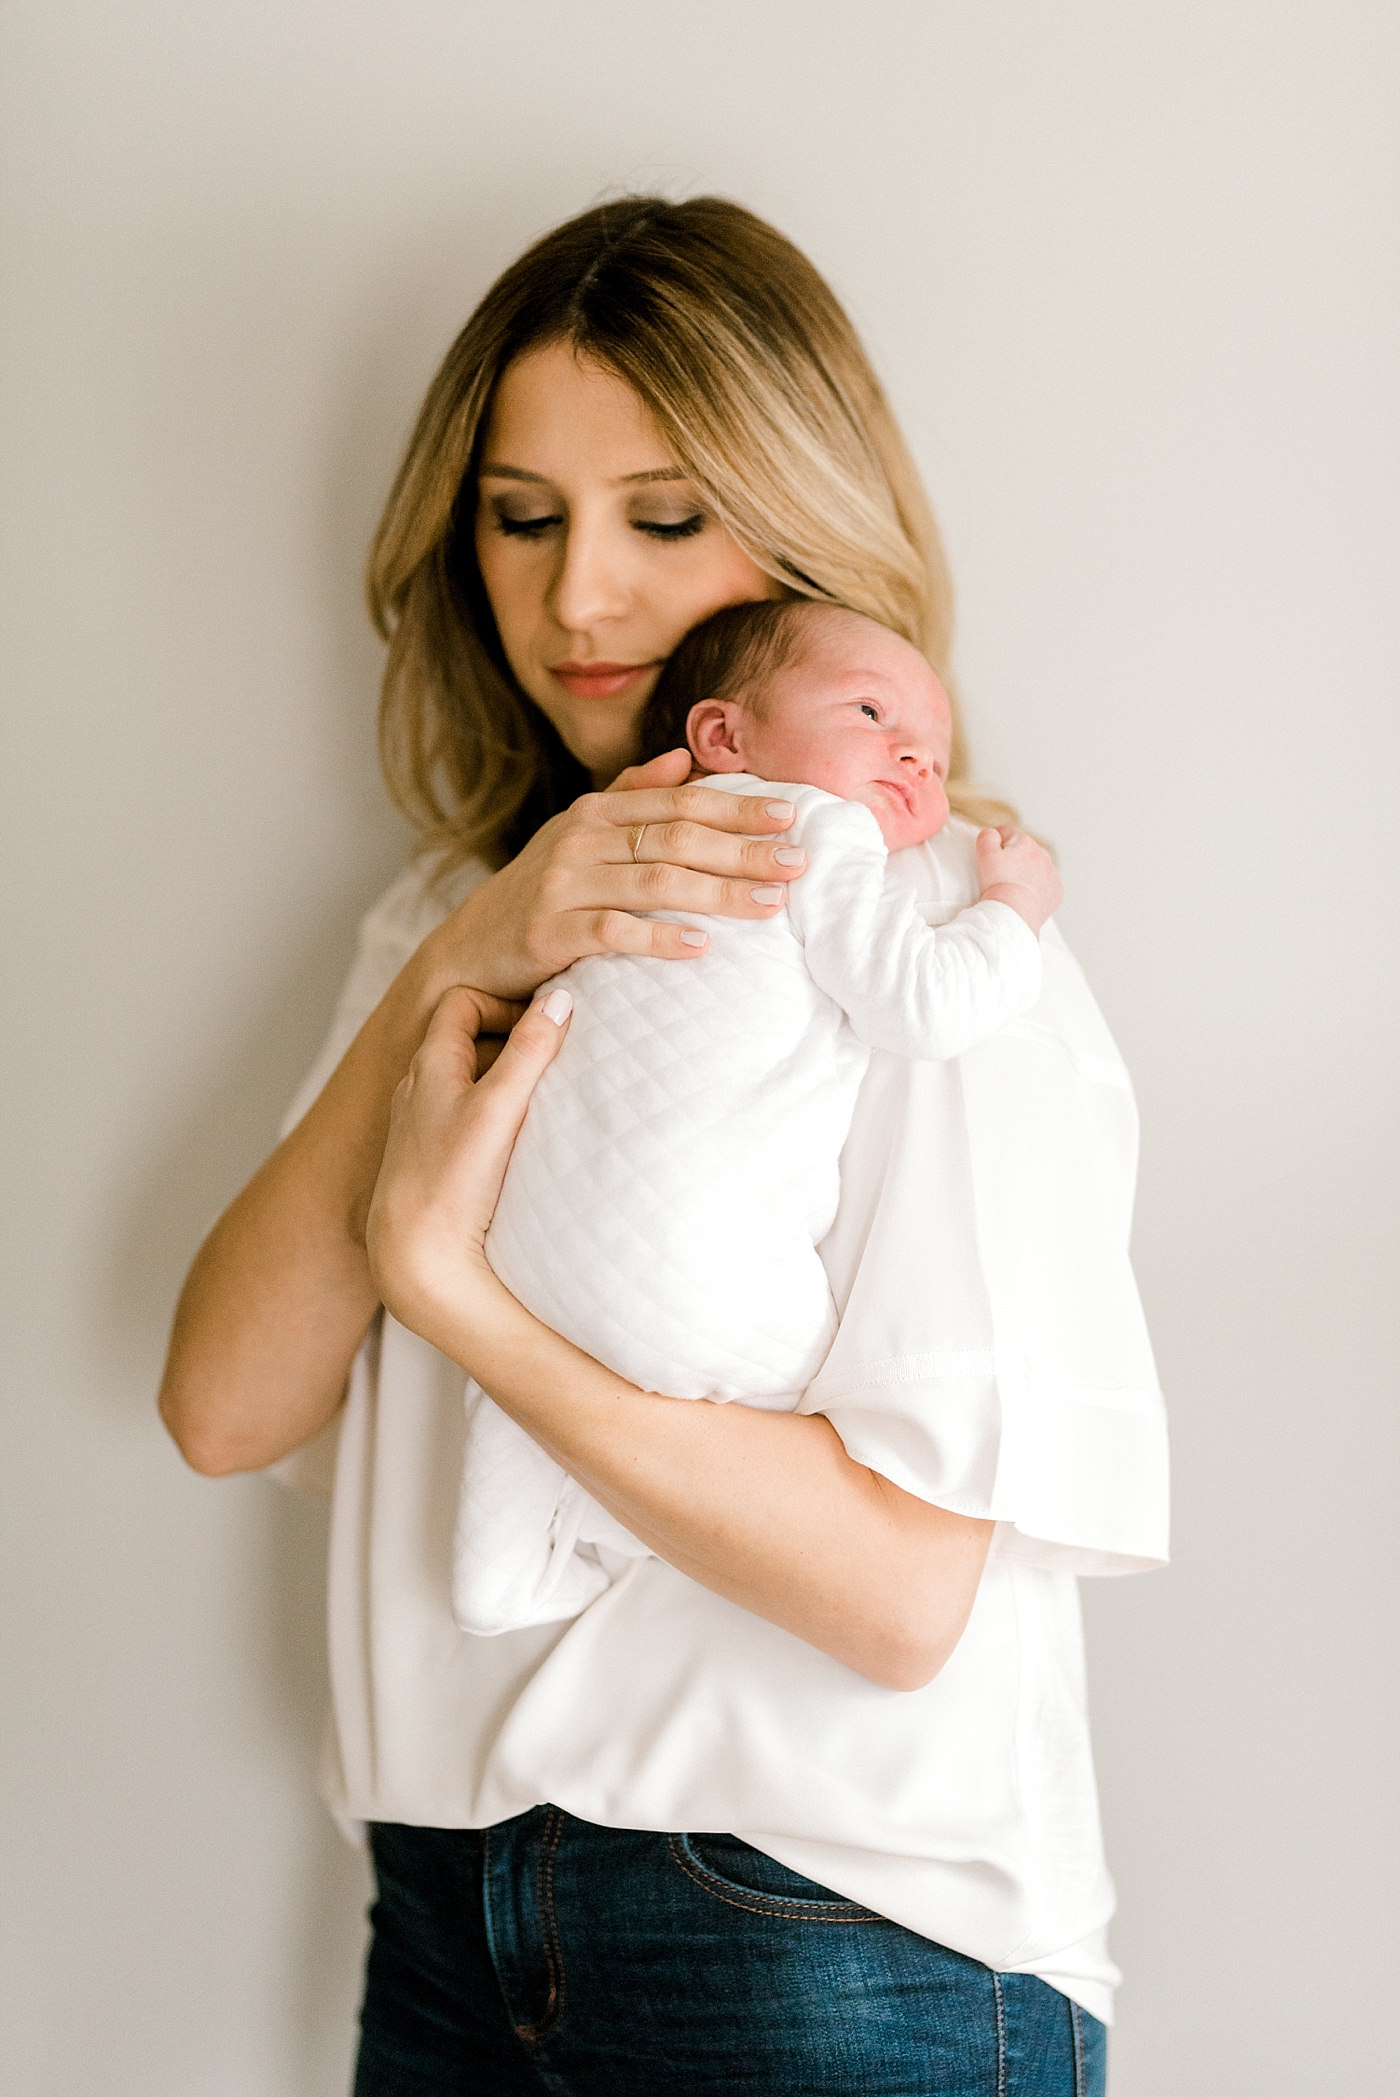 In Home Lifestyle Newborn Session by Boston Photographer Annmarie Swift